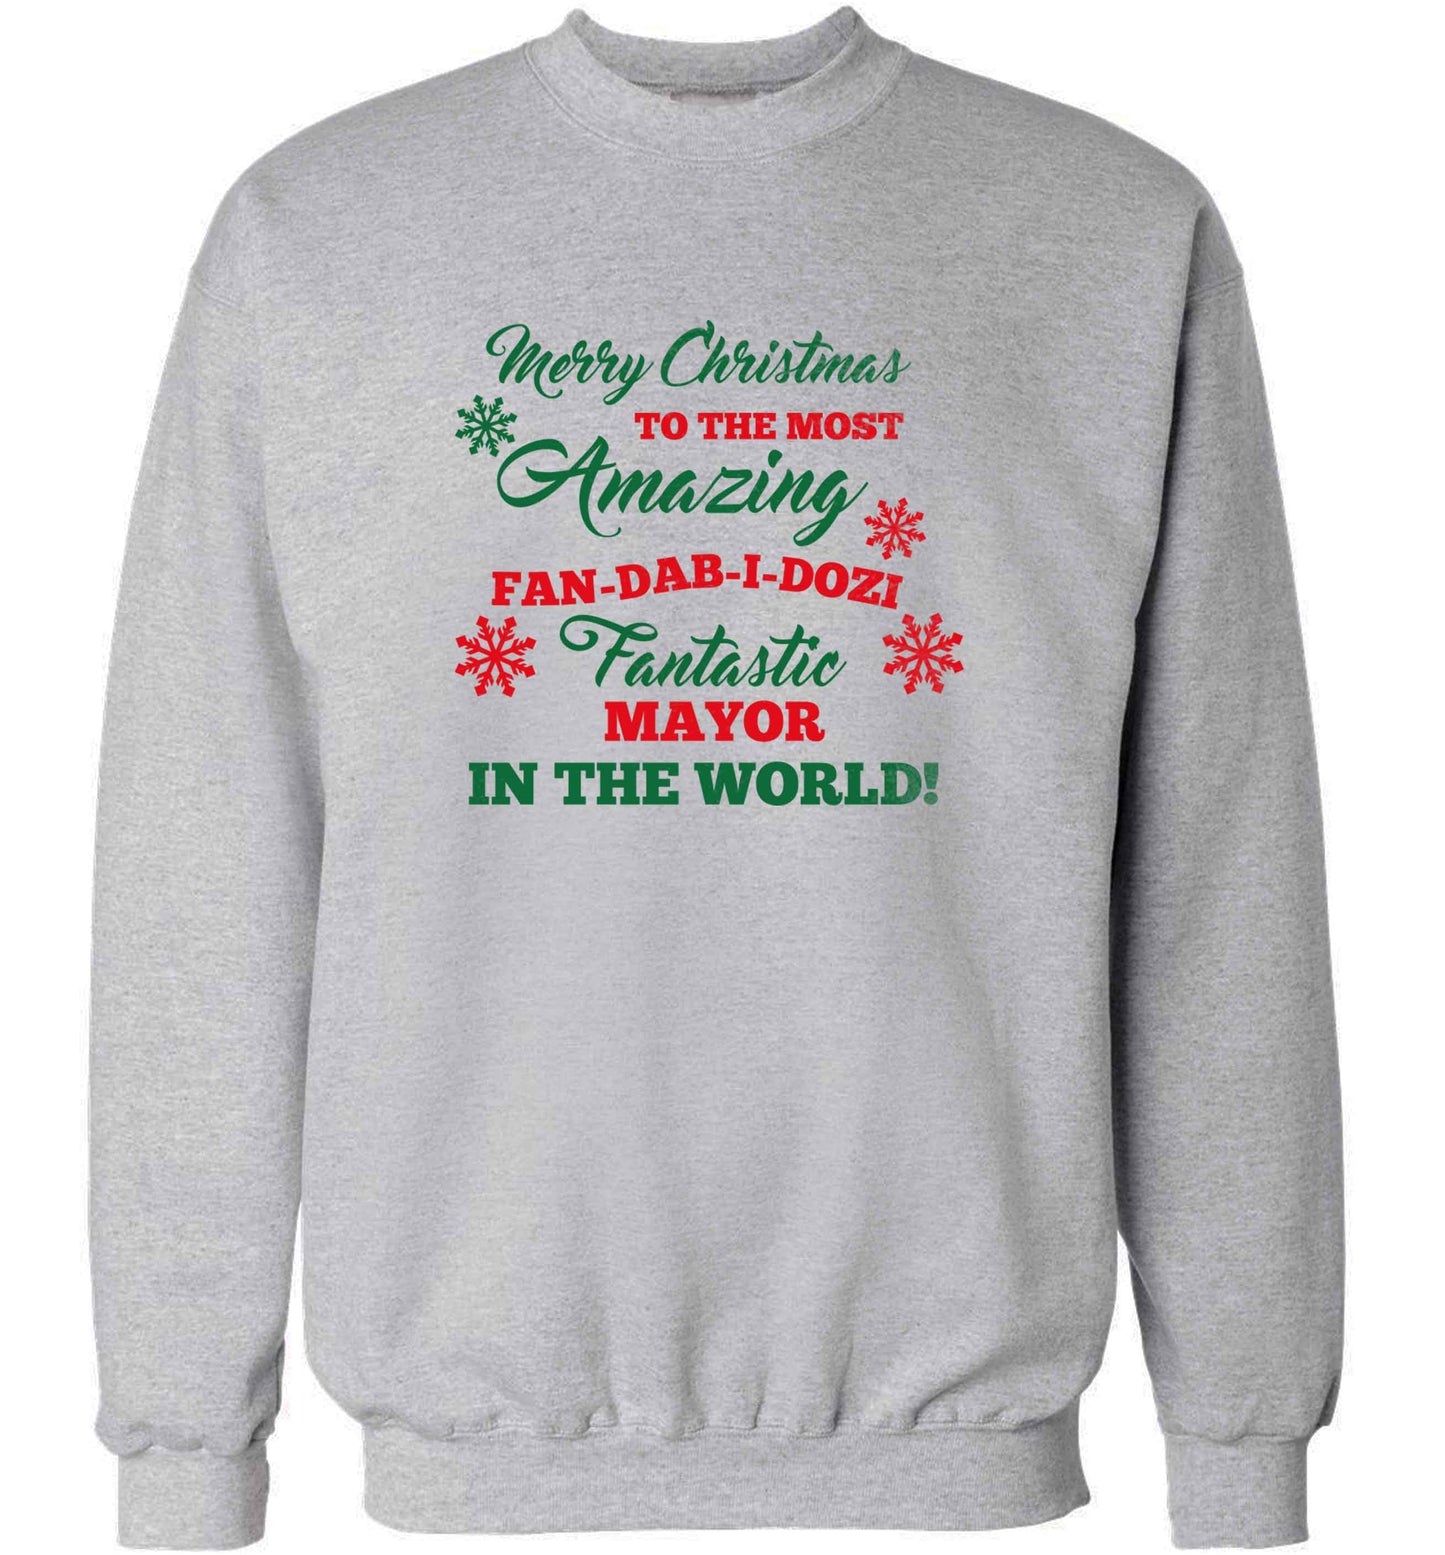 Merry Christmas to the most amazing fireman in the world! adult's unisex grey sweater 2XL